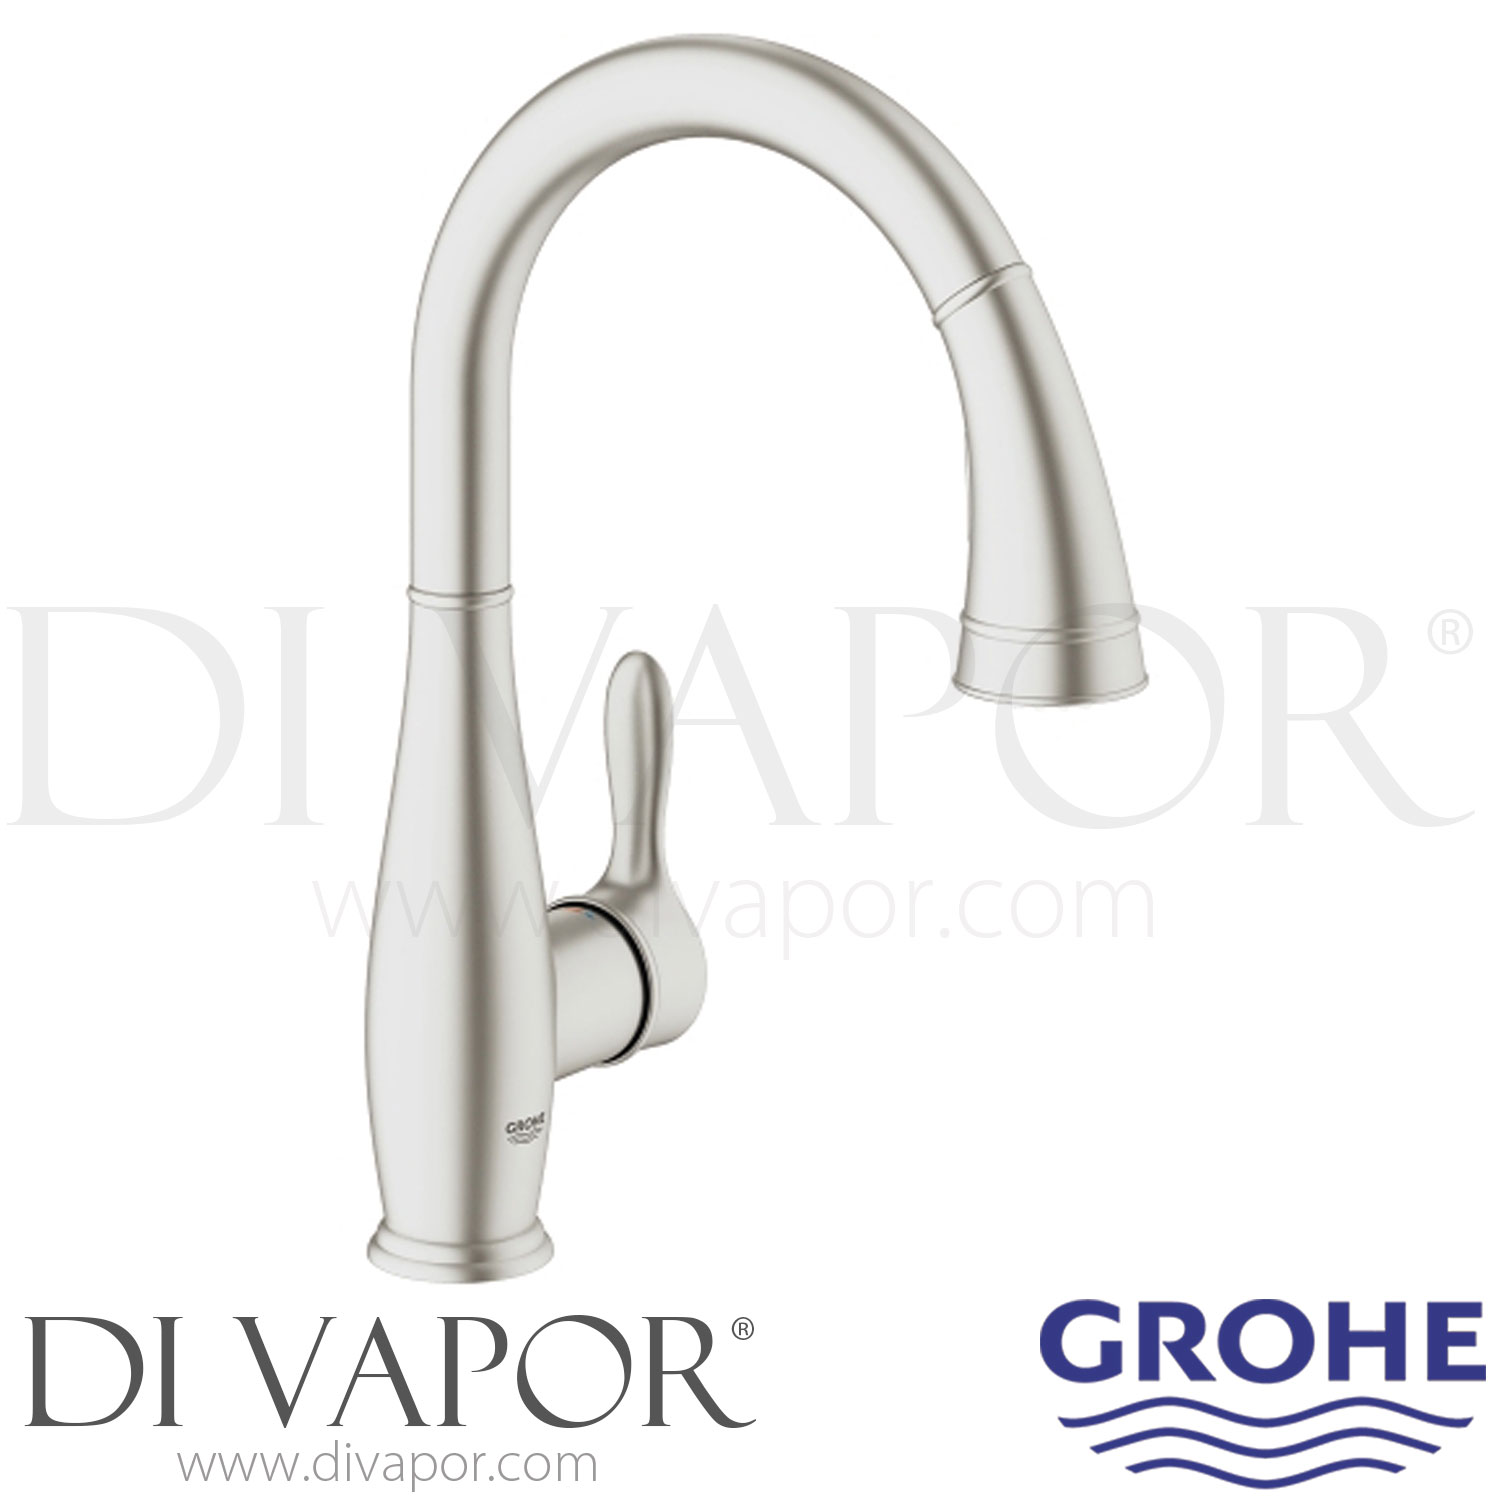 Grohe 3021c1 Parkfield Single Lever